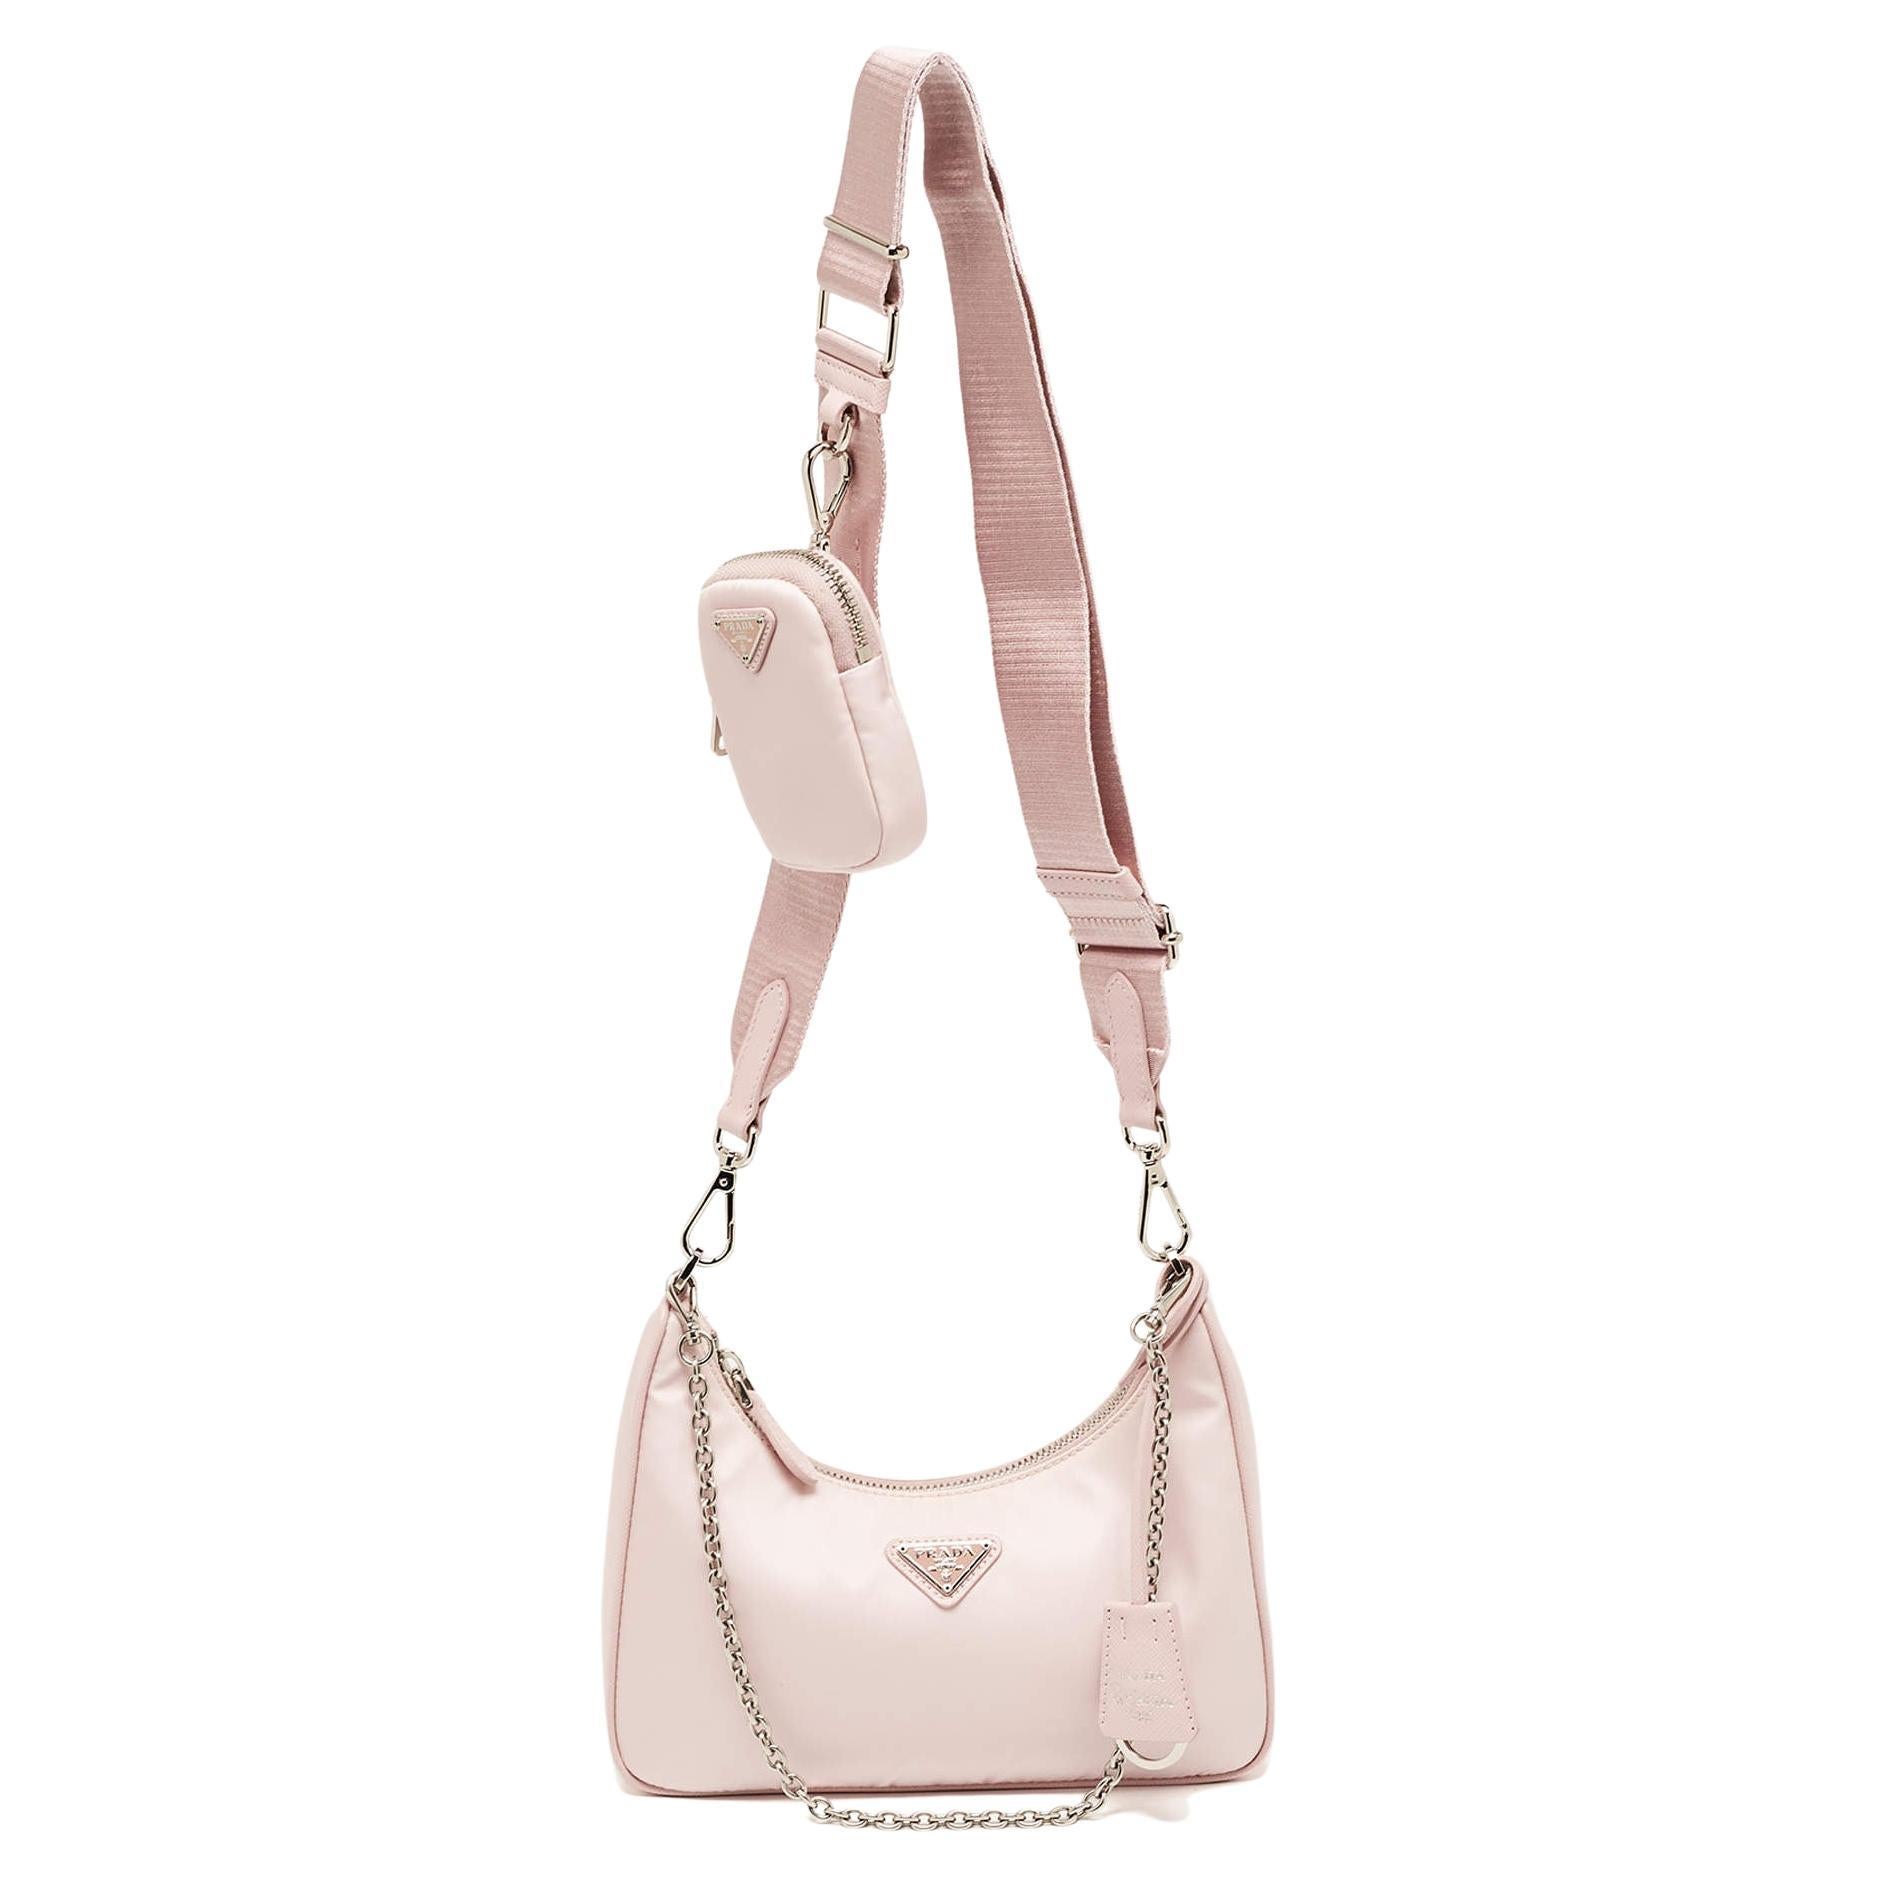 Prada Light Pink Nylon and Leather Re-Edition 2005 Baguette Bag